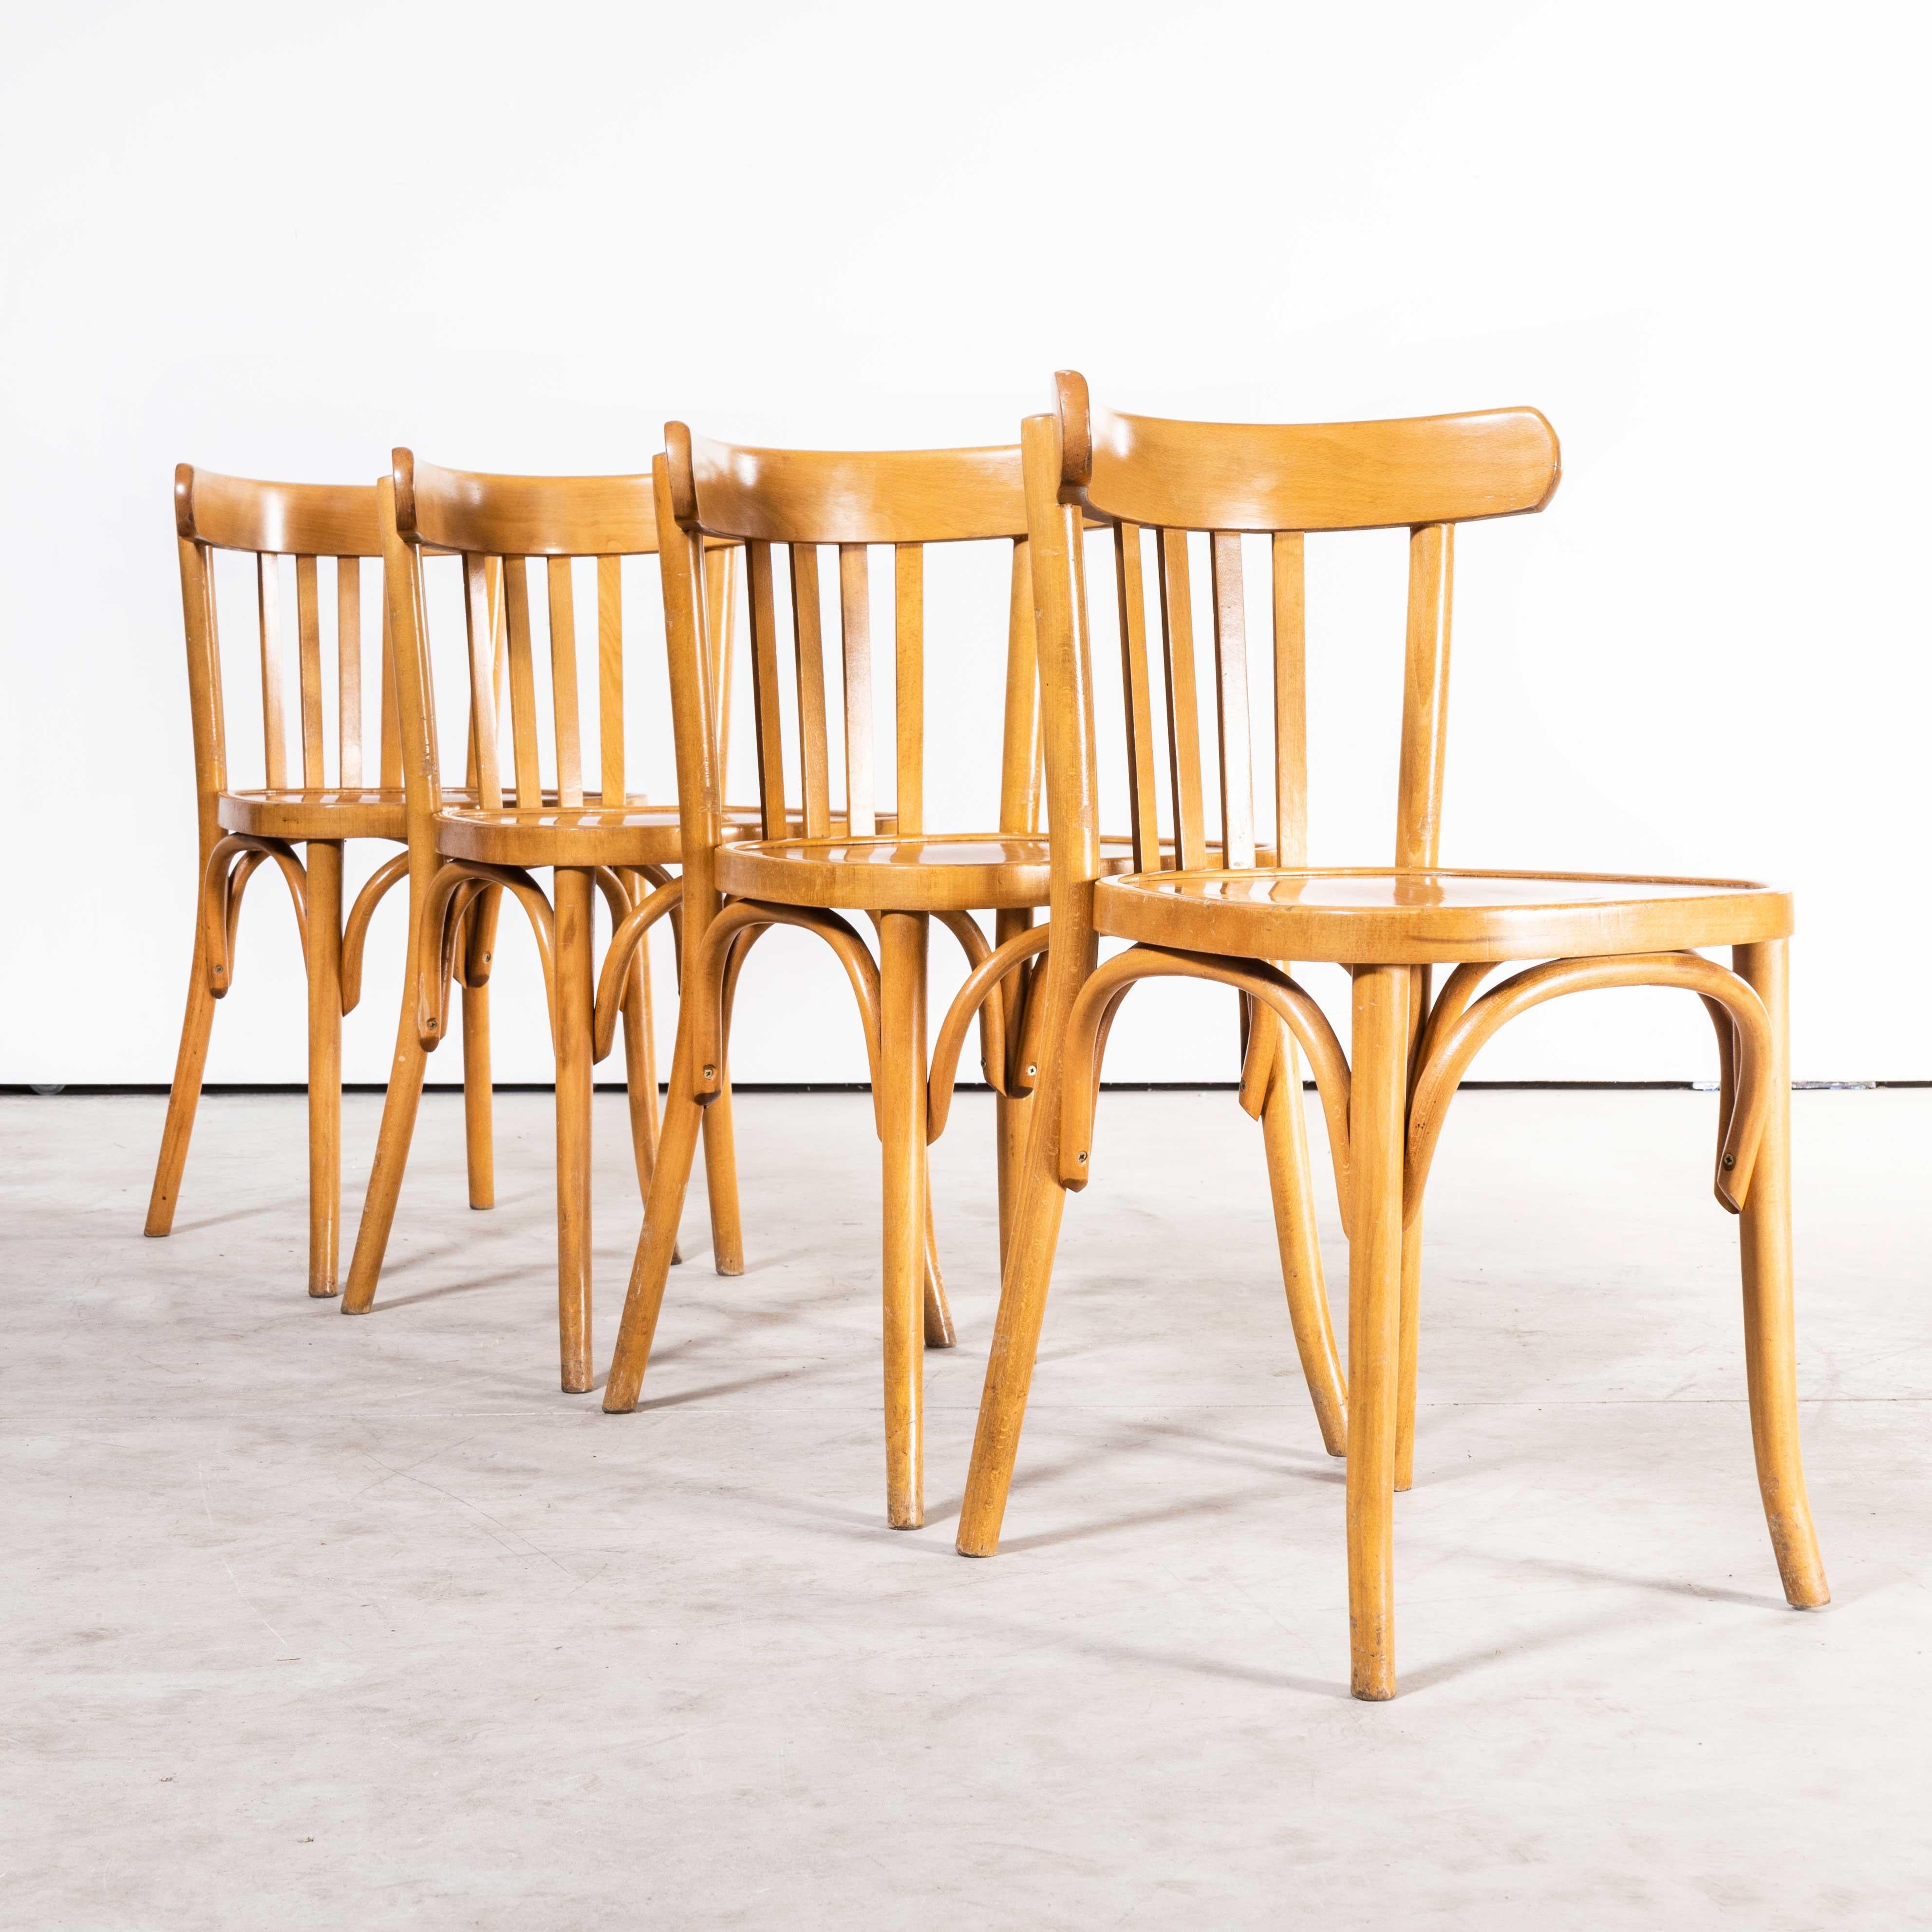 1970’s Bentwood honey beech bentwood dining chairs – set of four
1970’s Bentwood honey beech bentwood dining chairs – set of four. Sourced in France these are late production chairs from a traditional bentwood factory in Eastern Europe. High